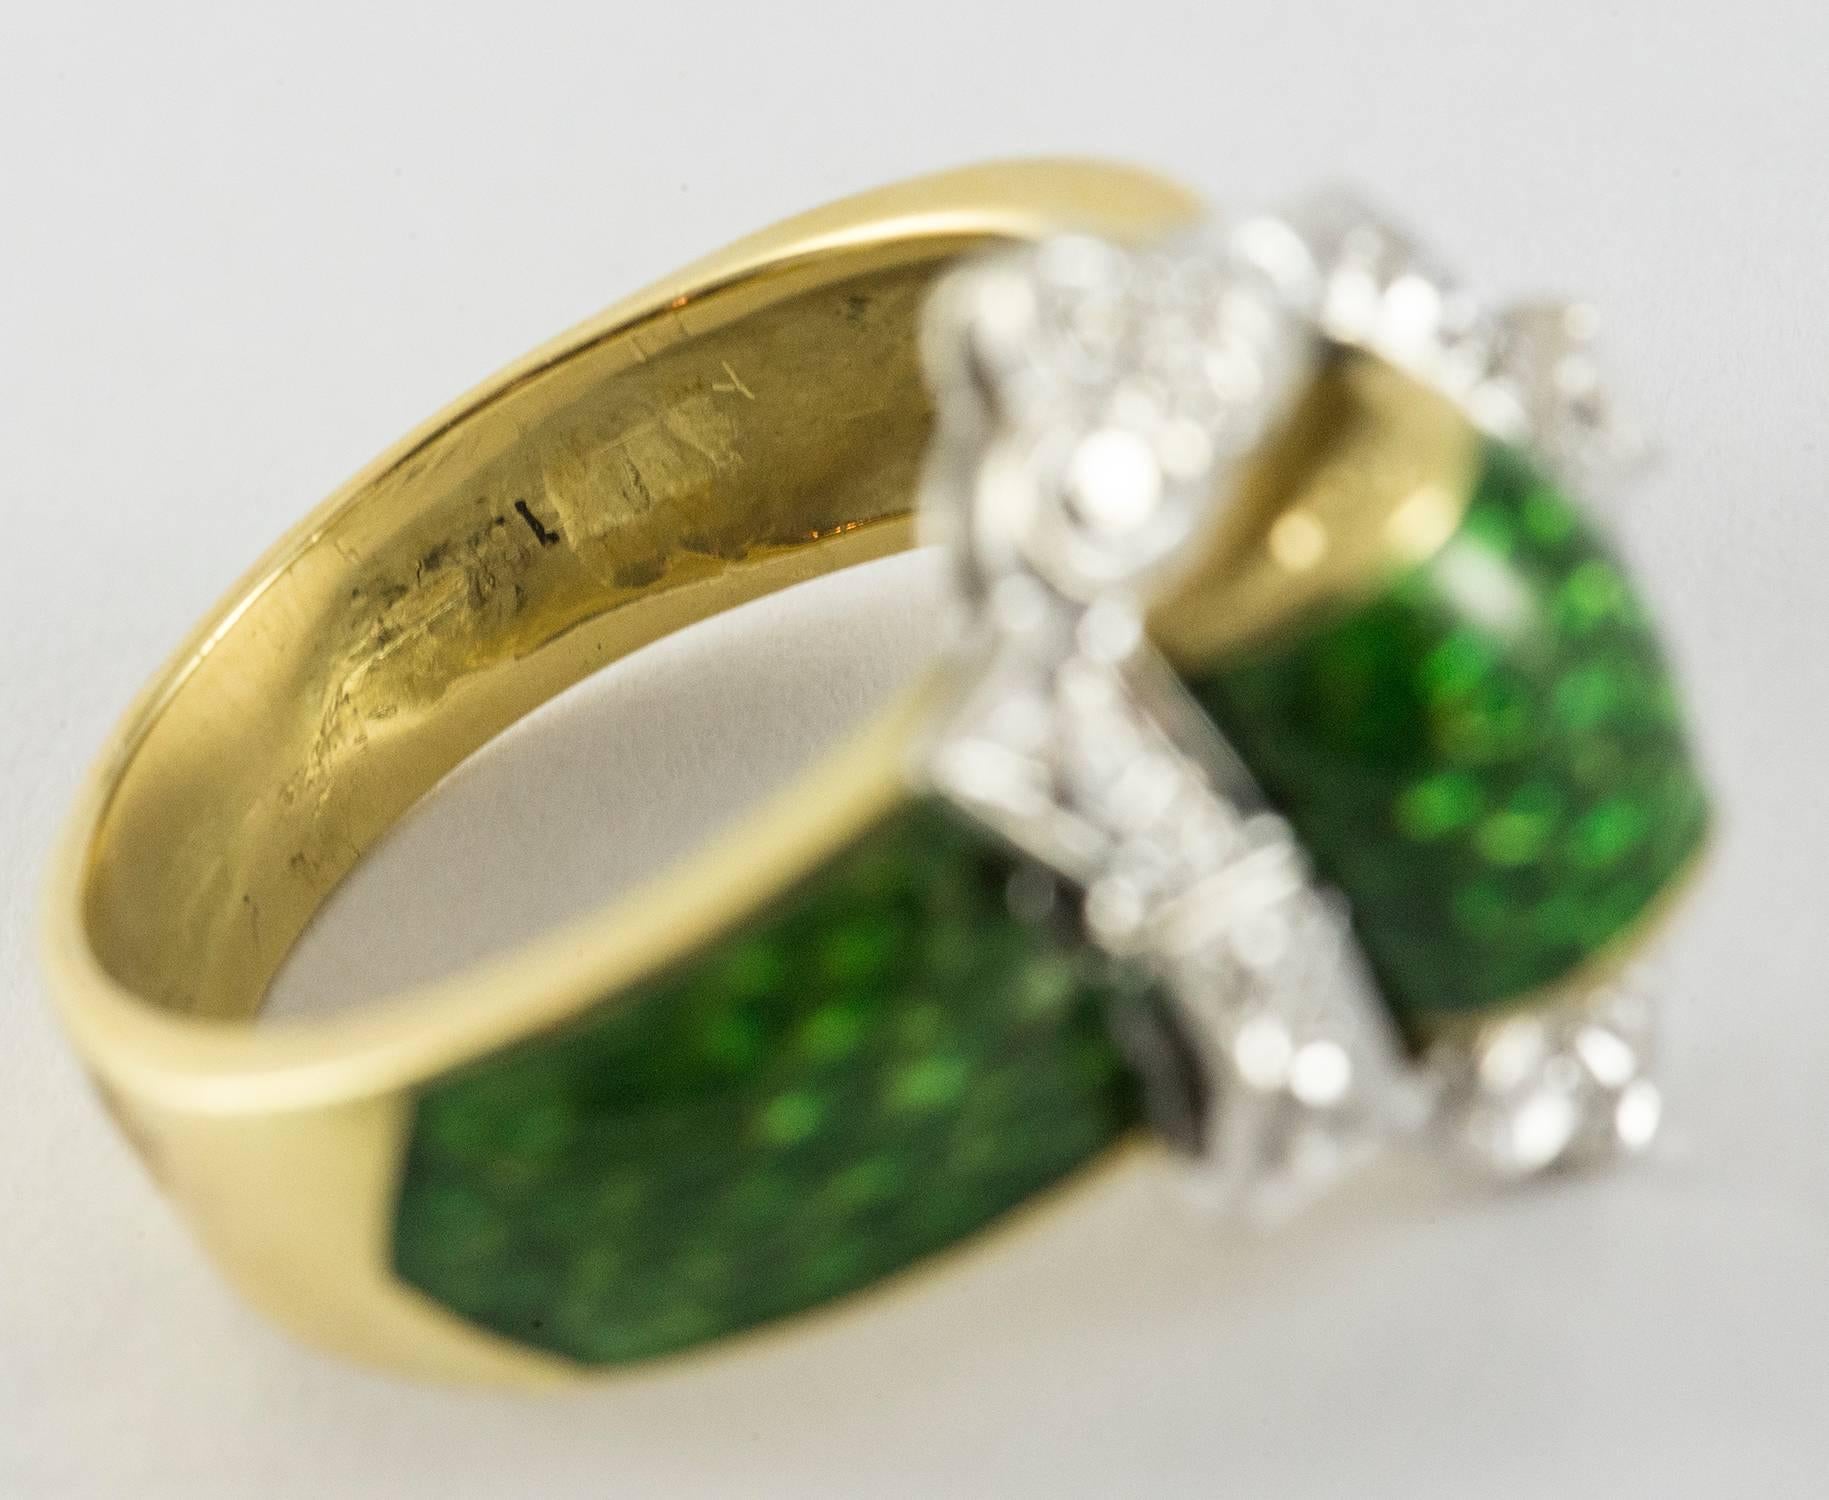 A beautiful enamel buckle ring set in 18k white and yellow gold. The front buckle is set in white gold with hand embellishment representing diamond detail. The green snake skin enamel representing the belt fabric is lush and detailed. This ring